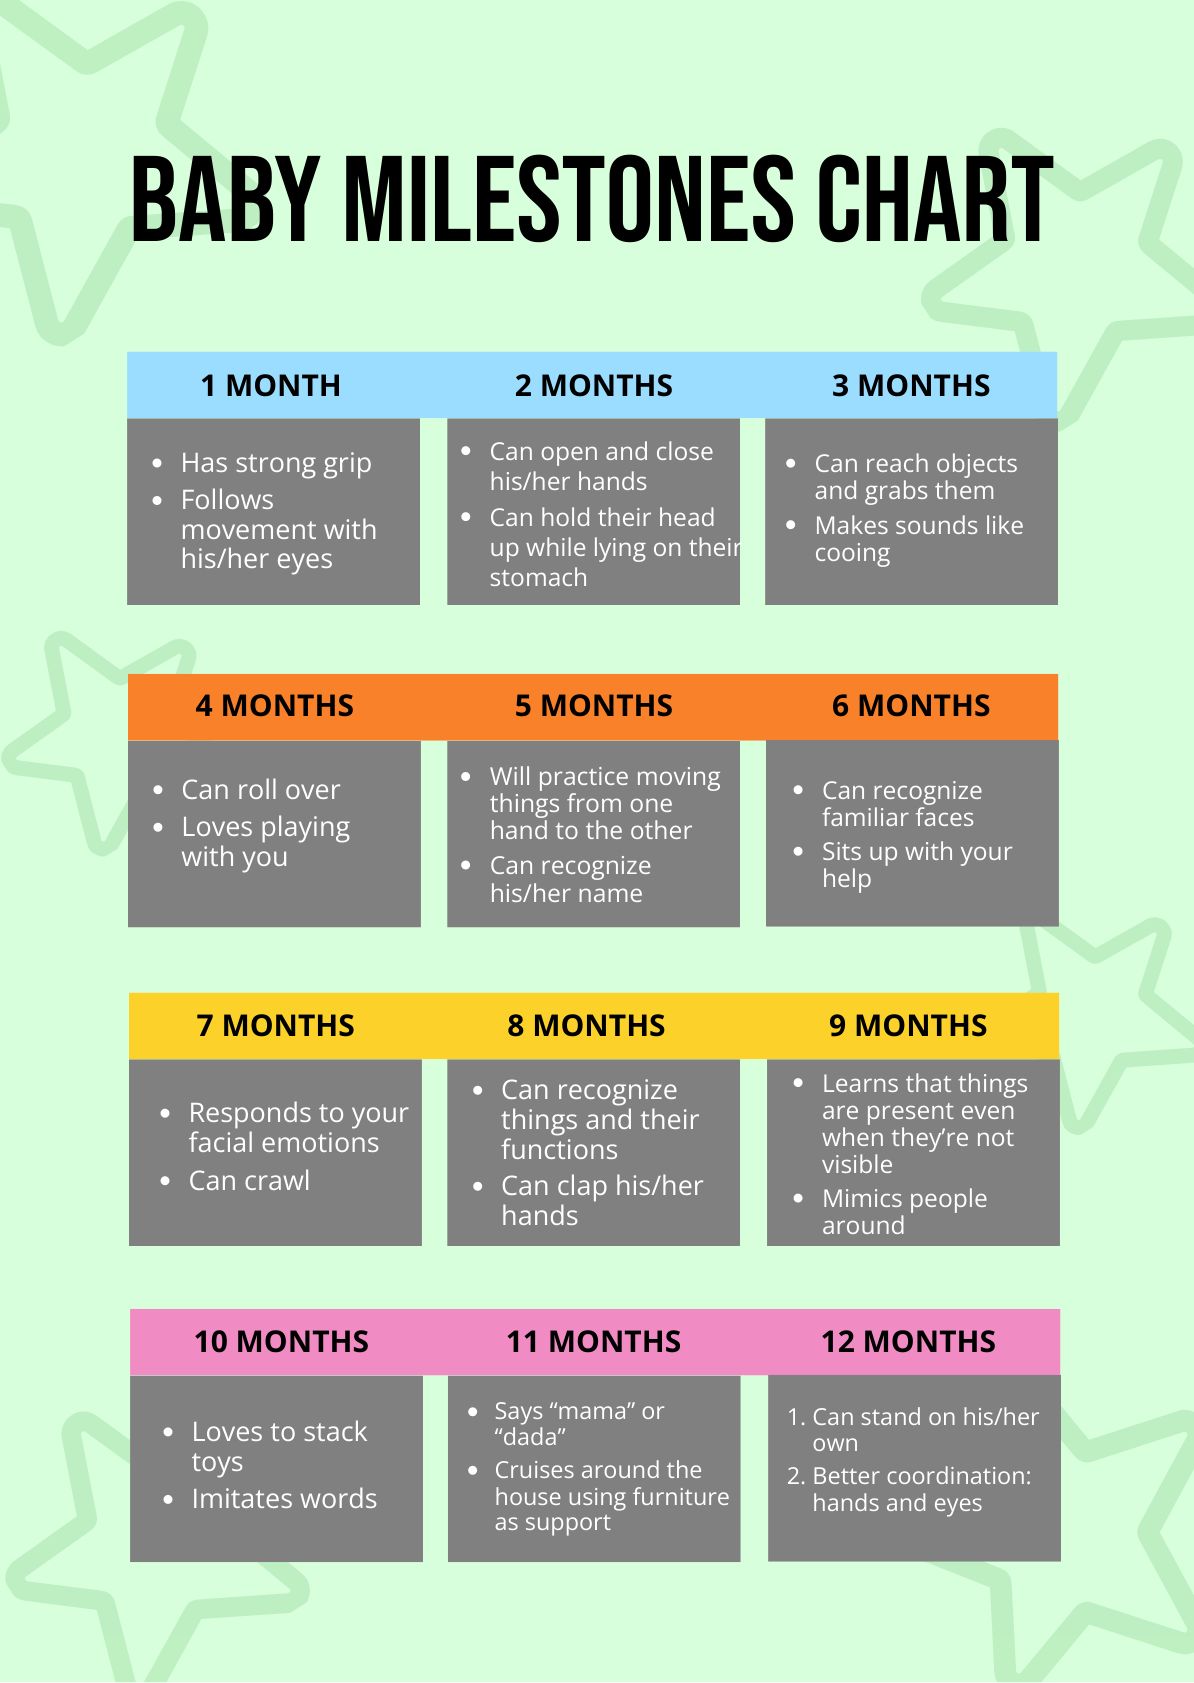 Free Free Gifted Baby Milestones Chart - PDF | Template.net